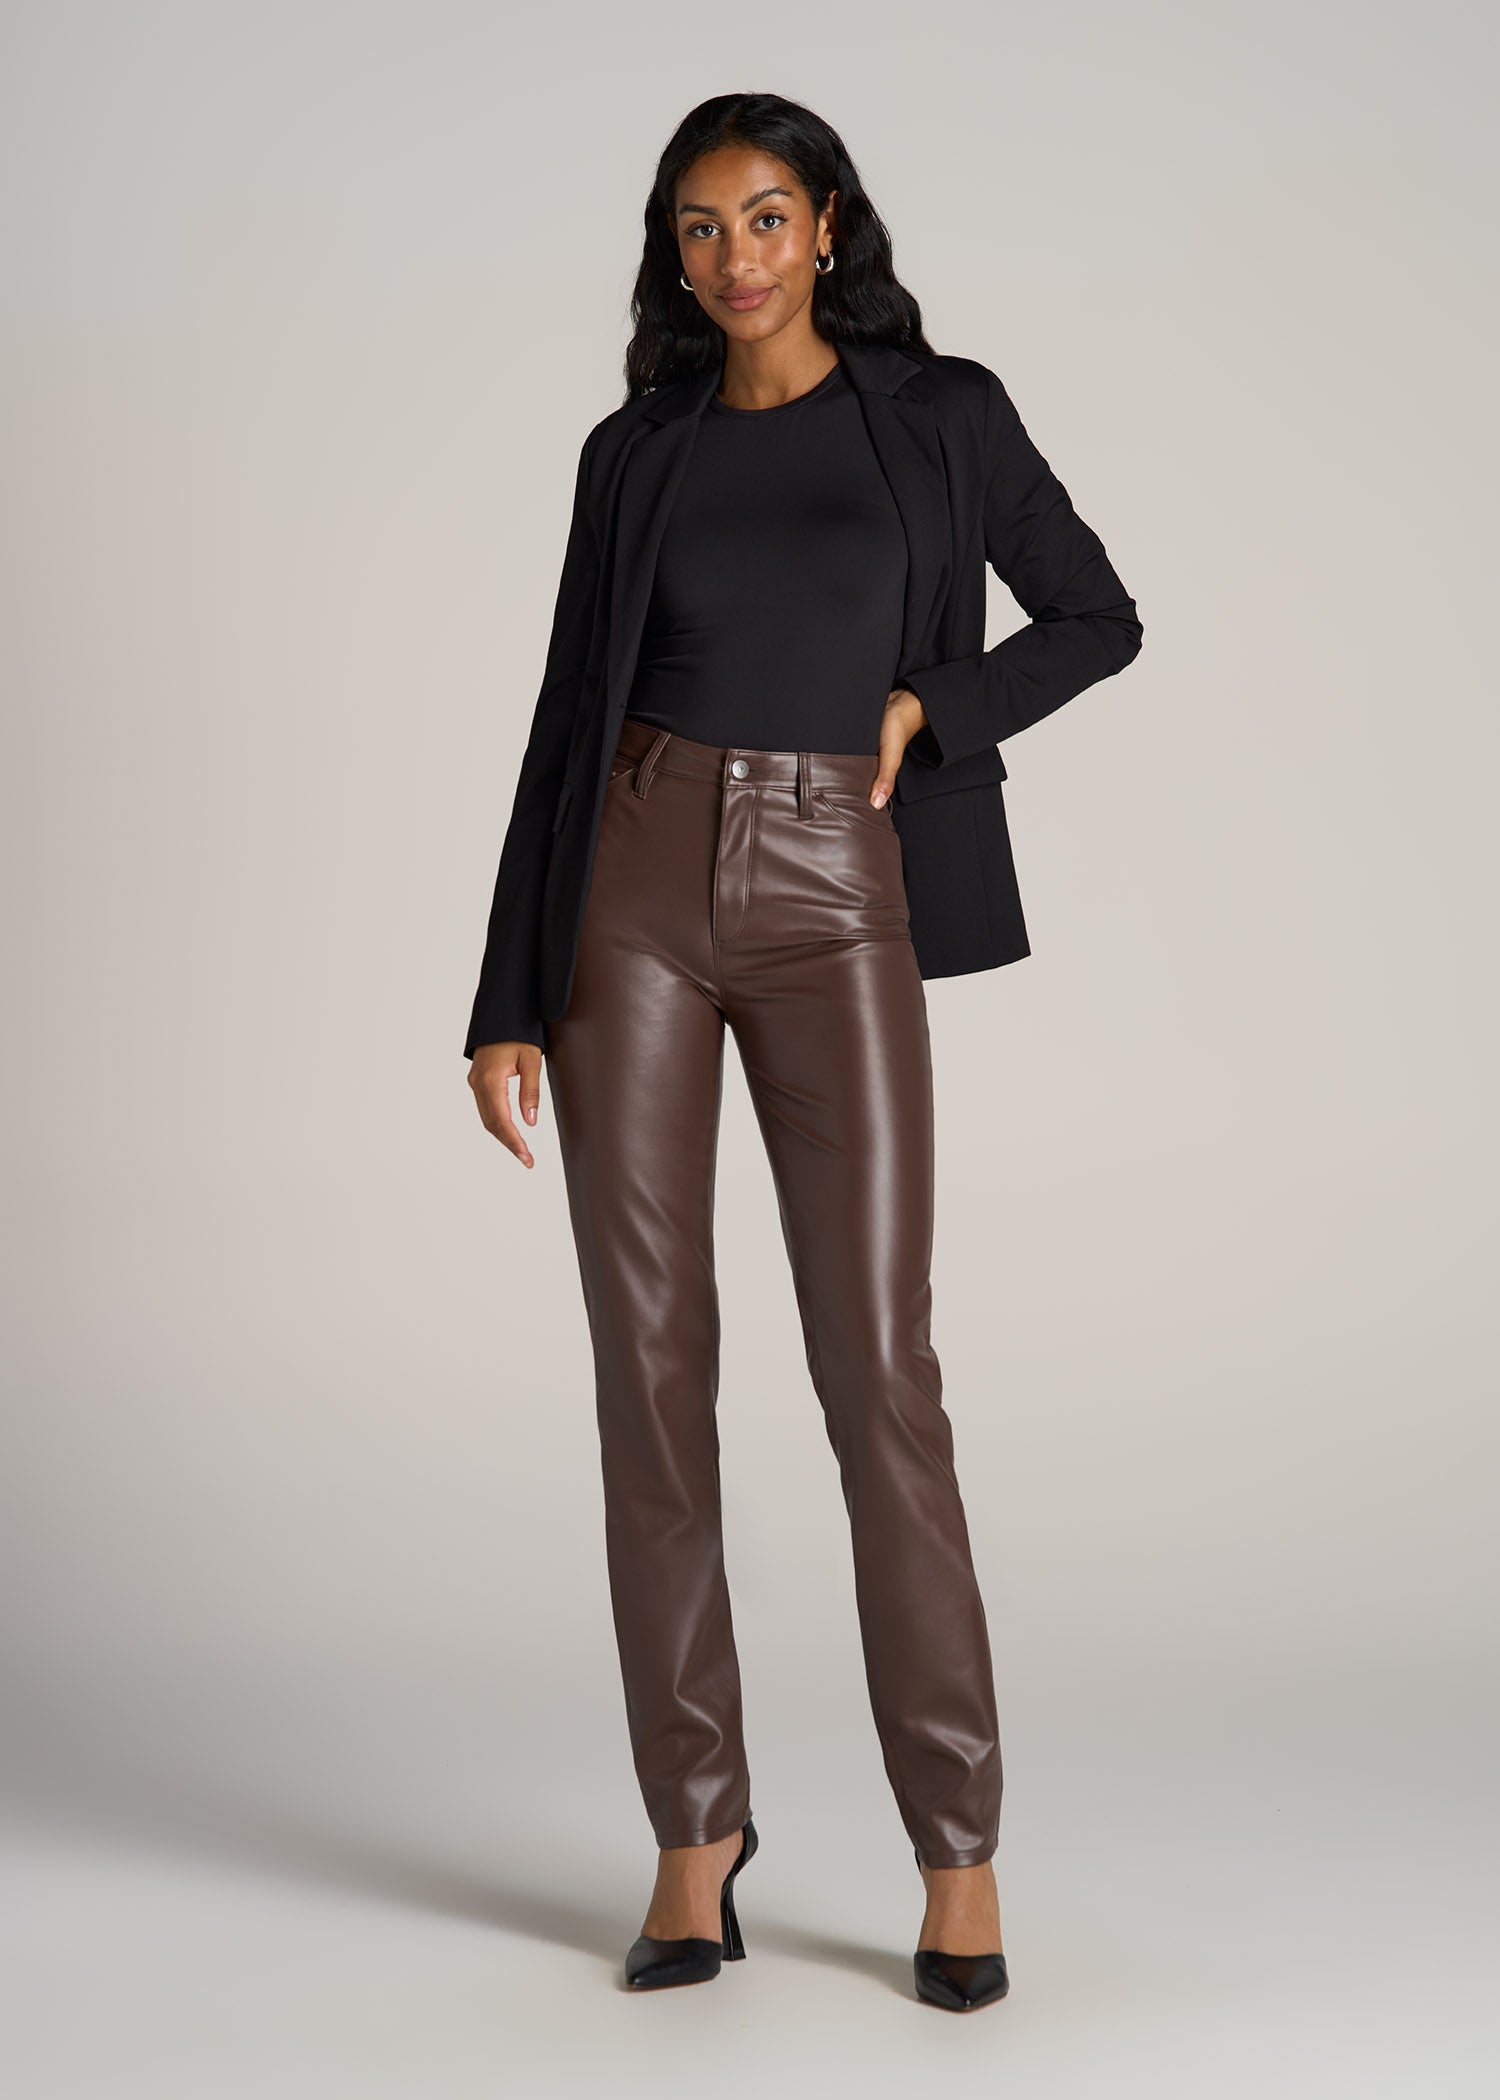 Women's Leather Trousers, Leather Leggings